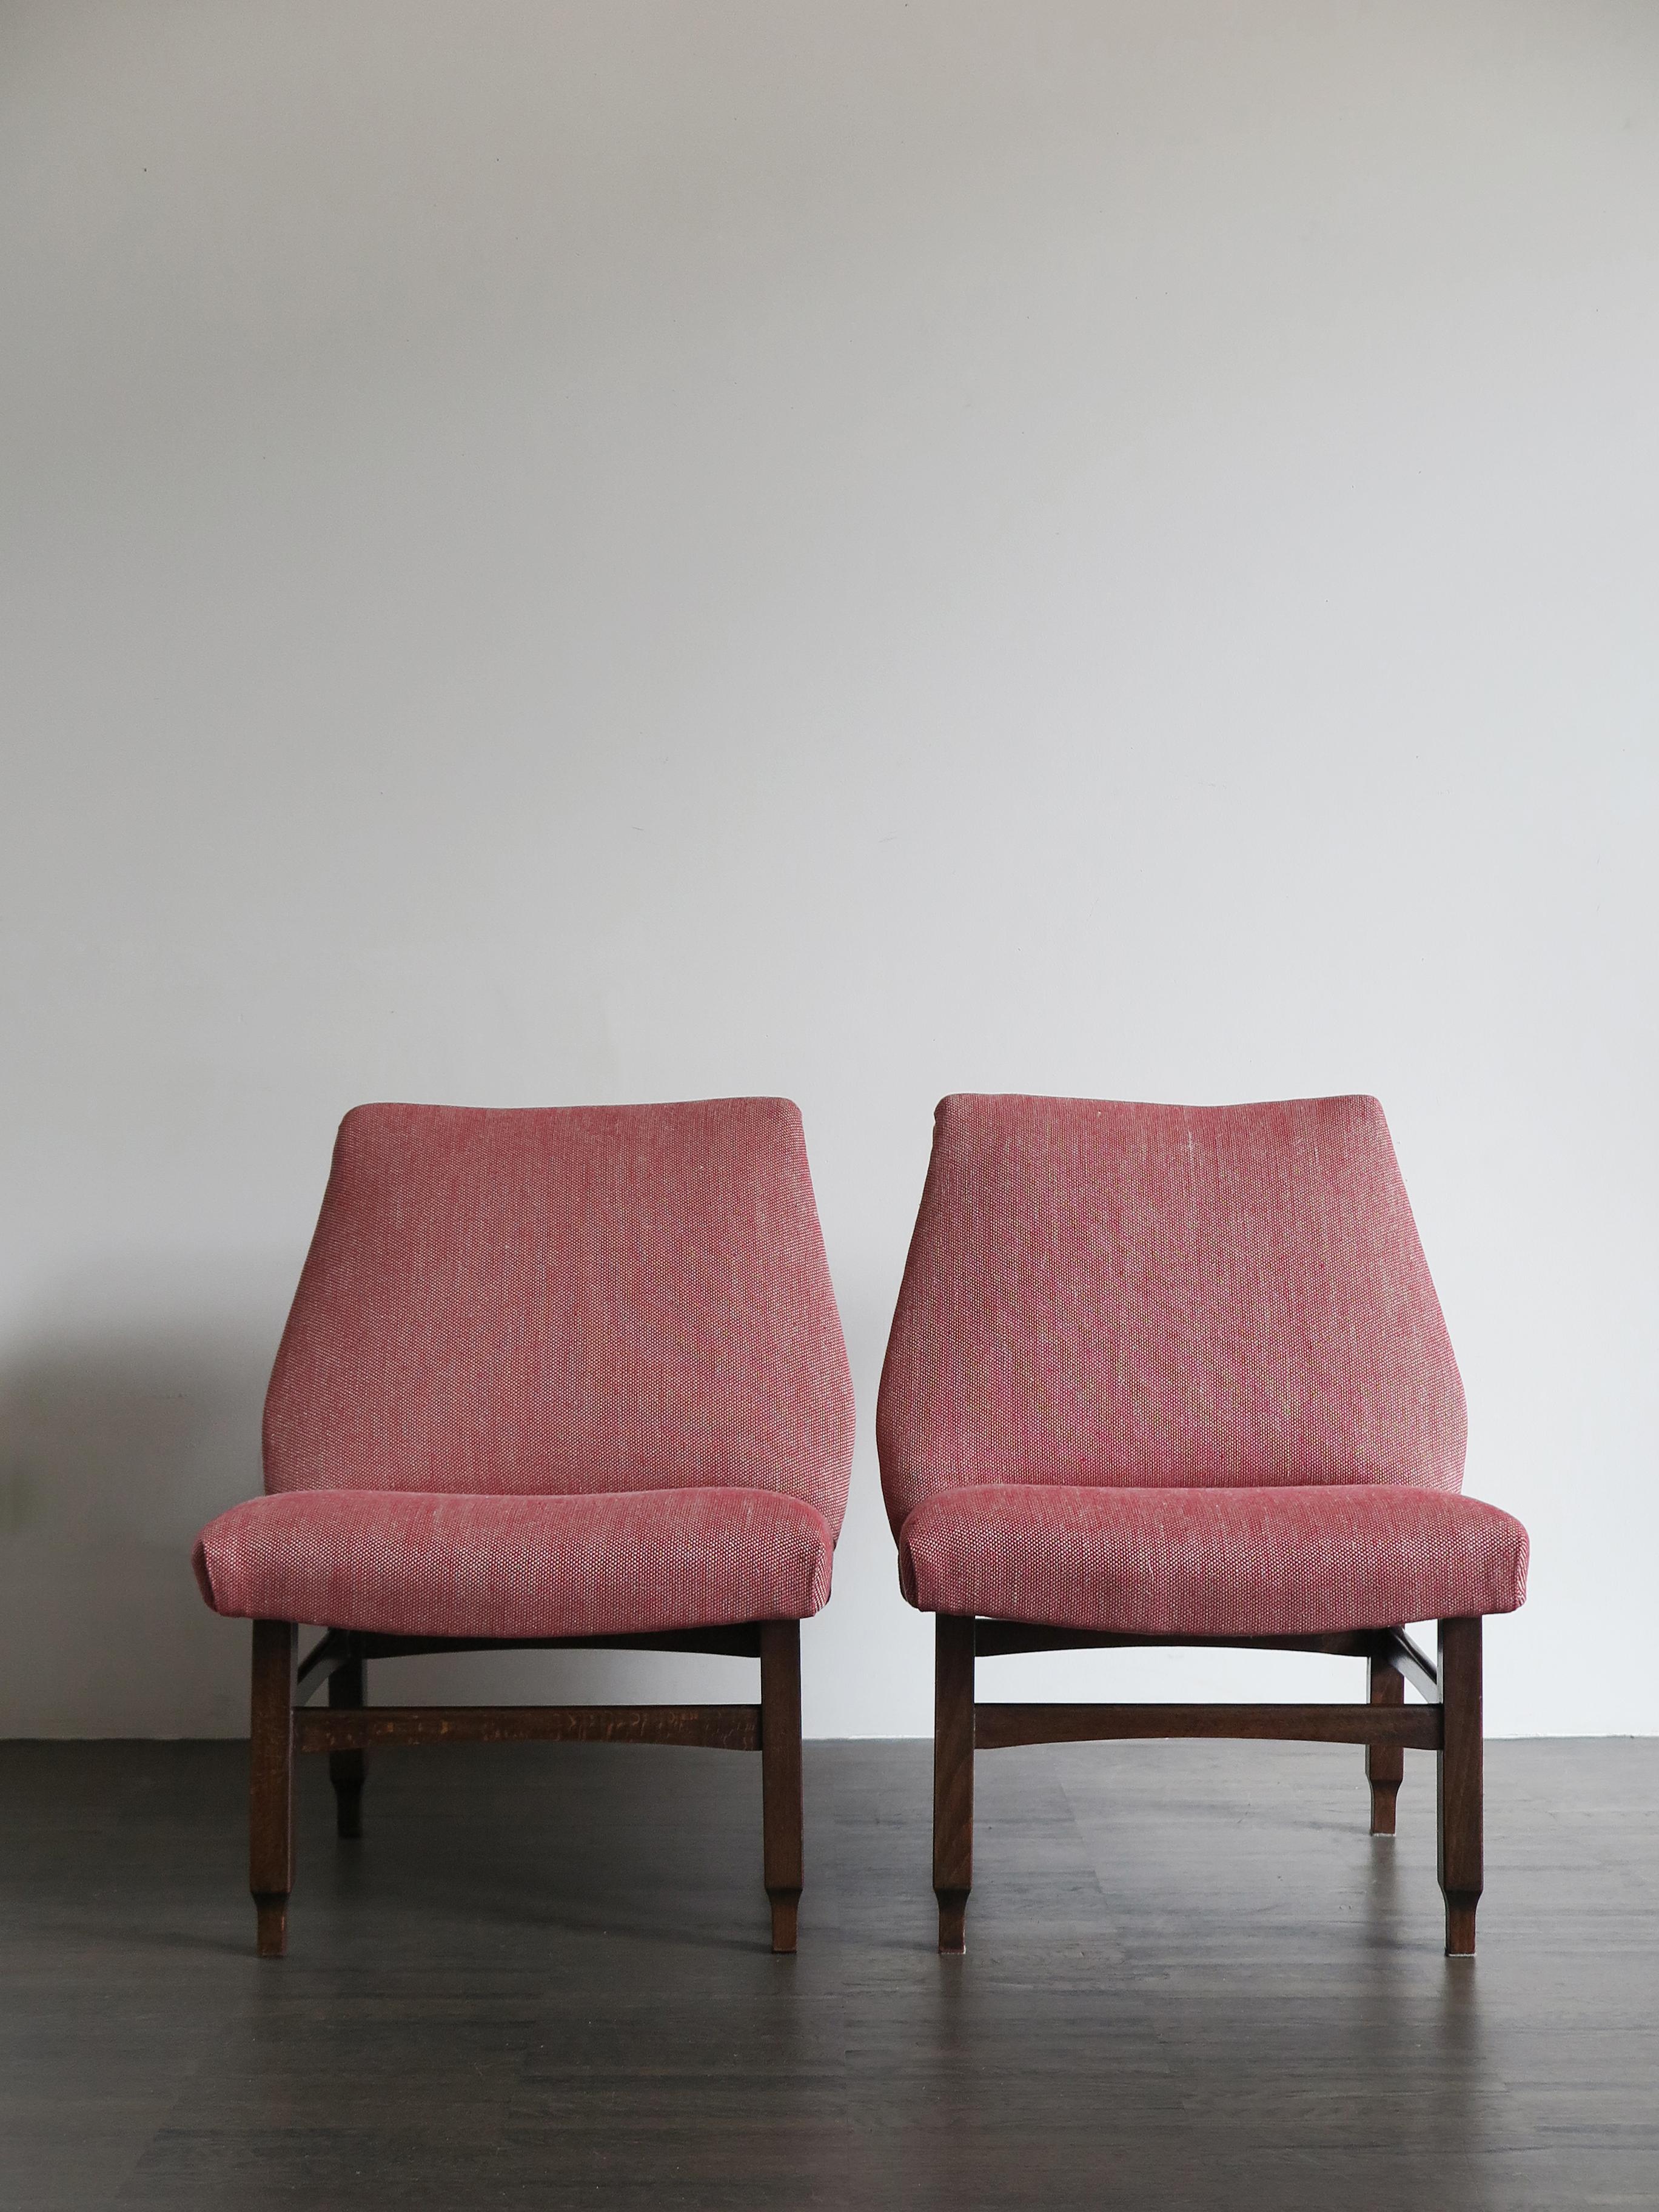 Set of two Italian Mid-Century Modern design armchairs with legs structure in solid wood and with new padding and upholstery, 1950s.
Very excellent vintage condition.